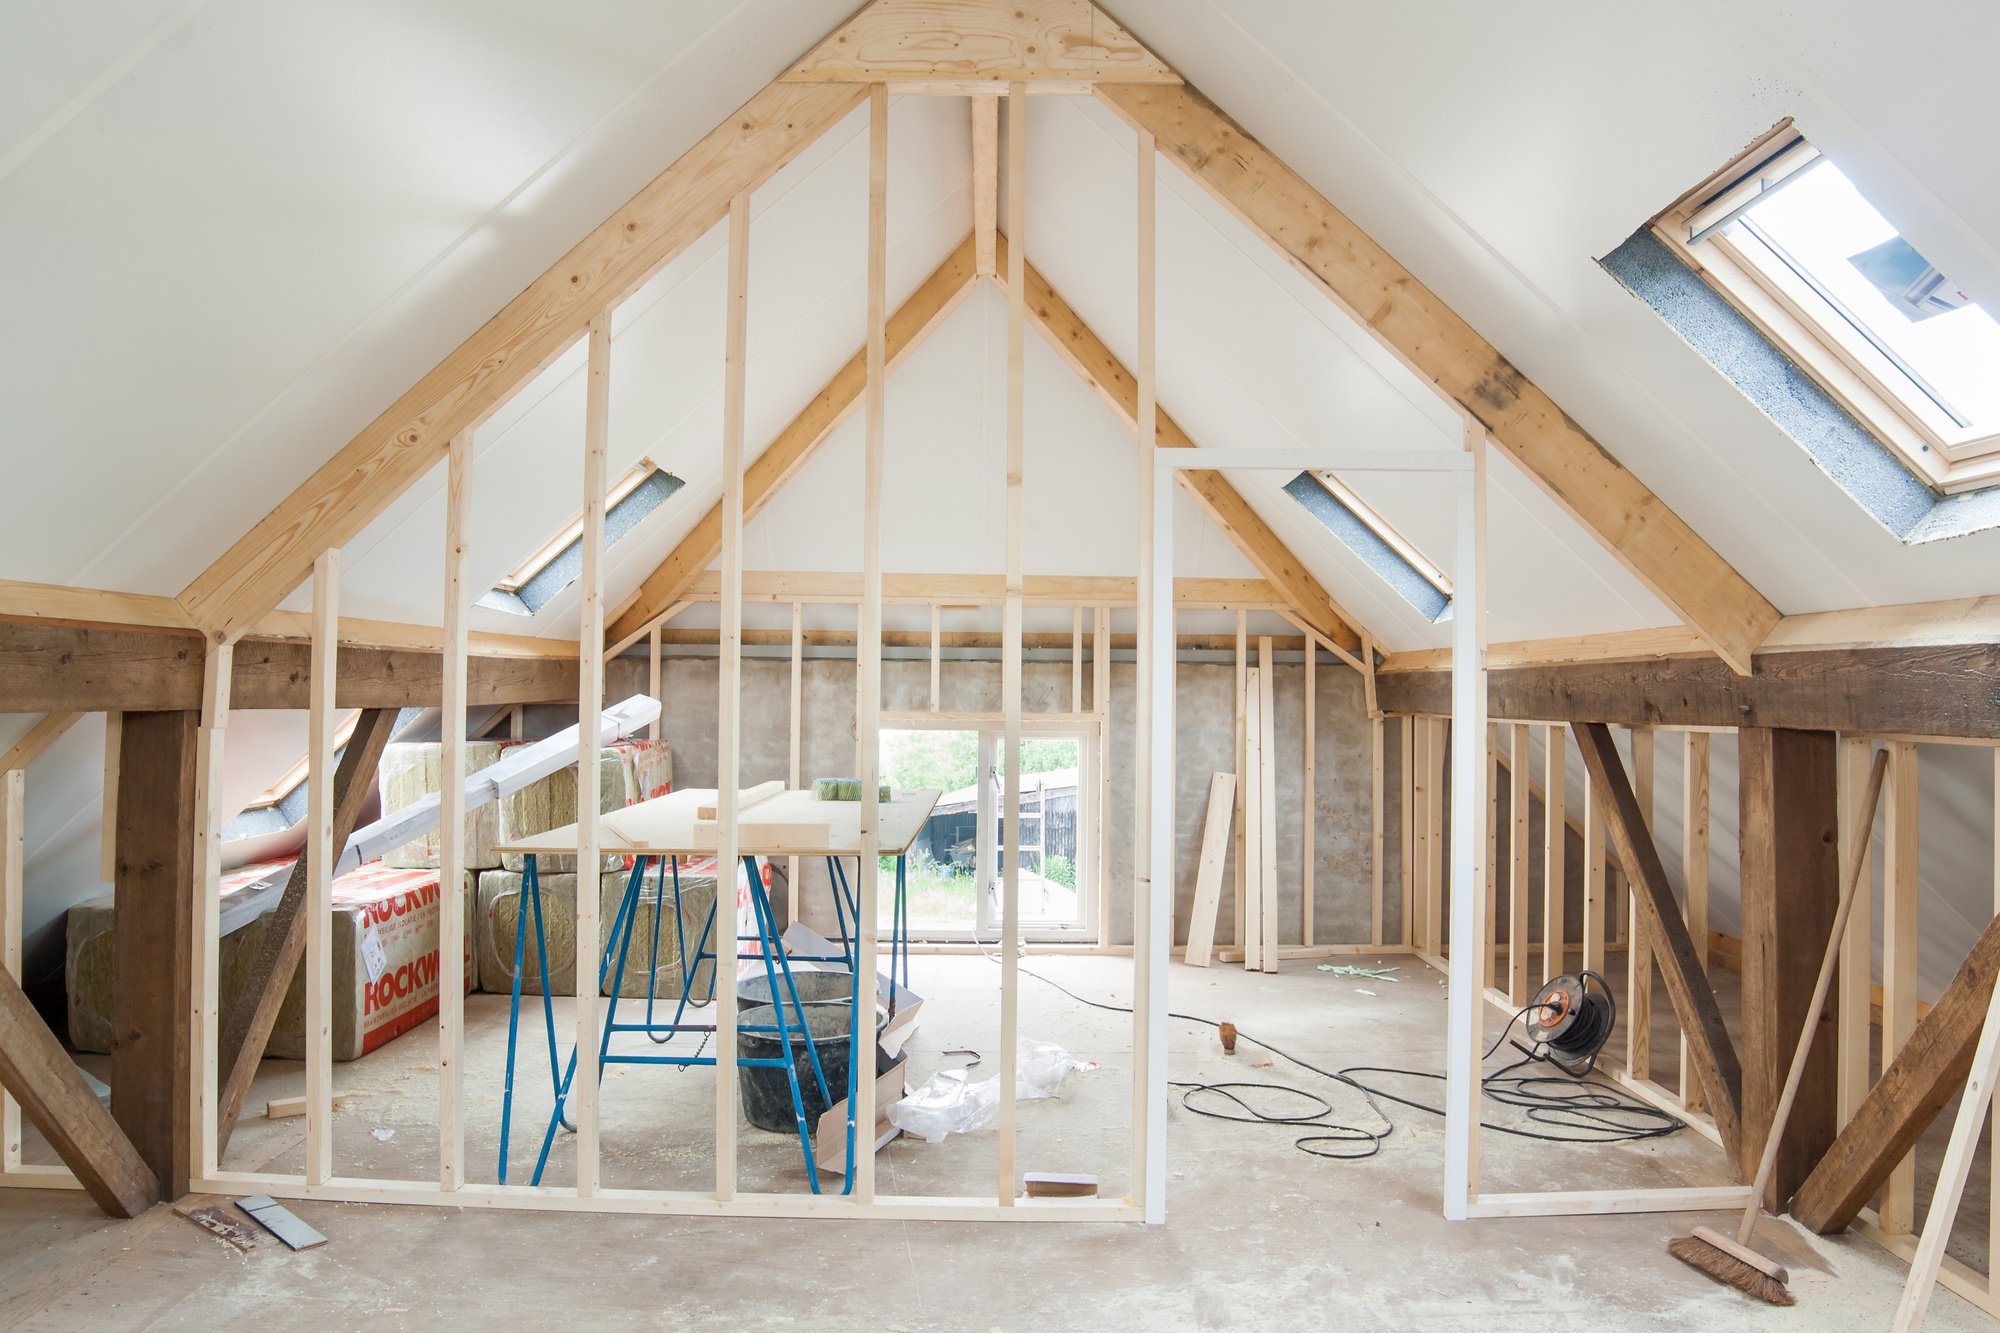 Improve your living conditions with a home remodeling. Learn about the different types of home remodeling ideas for homes with small spaces.